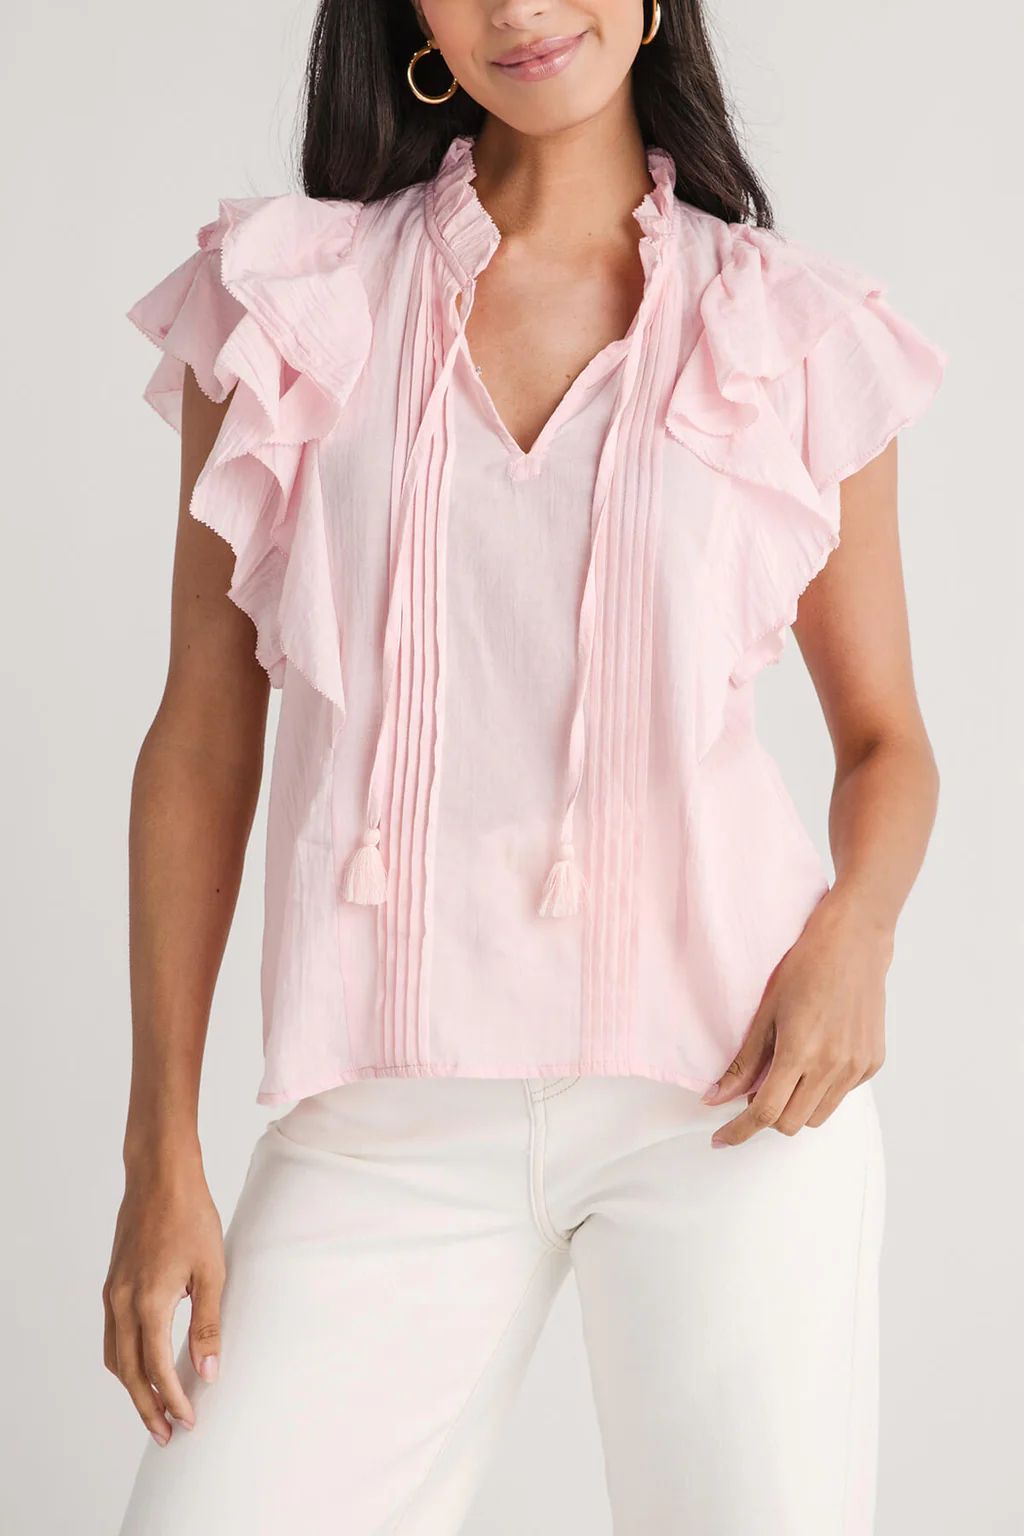 Olivaceous Janelle Ruffle Top | Social Threads